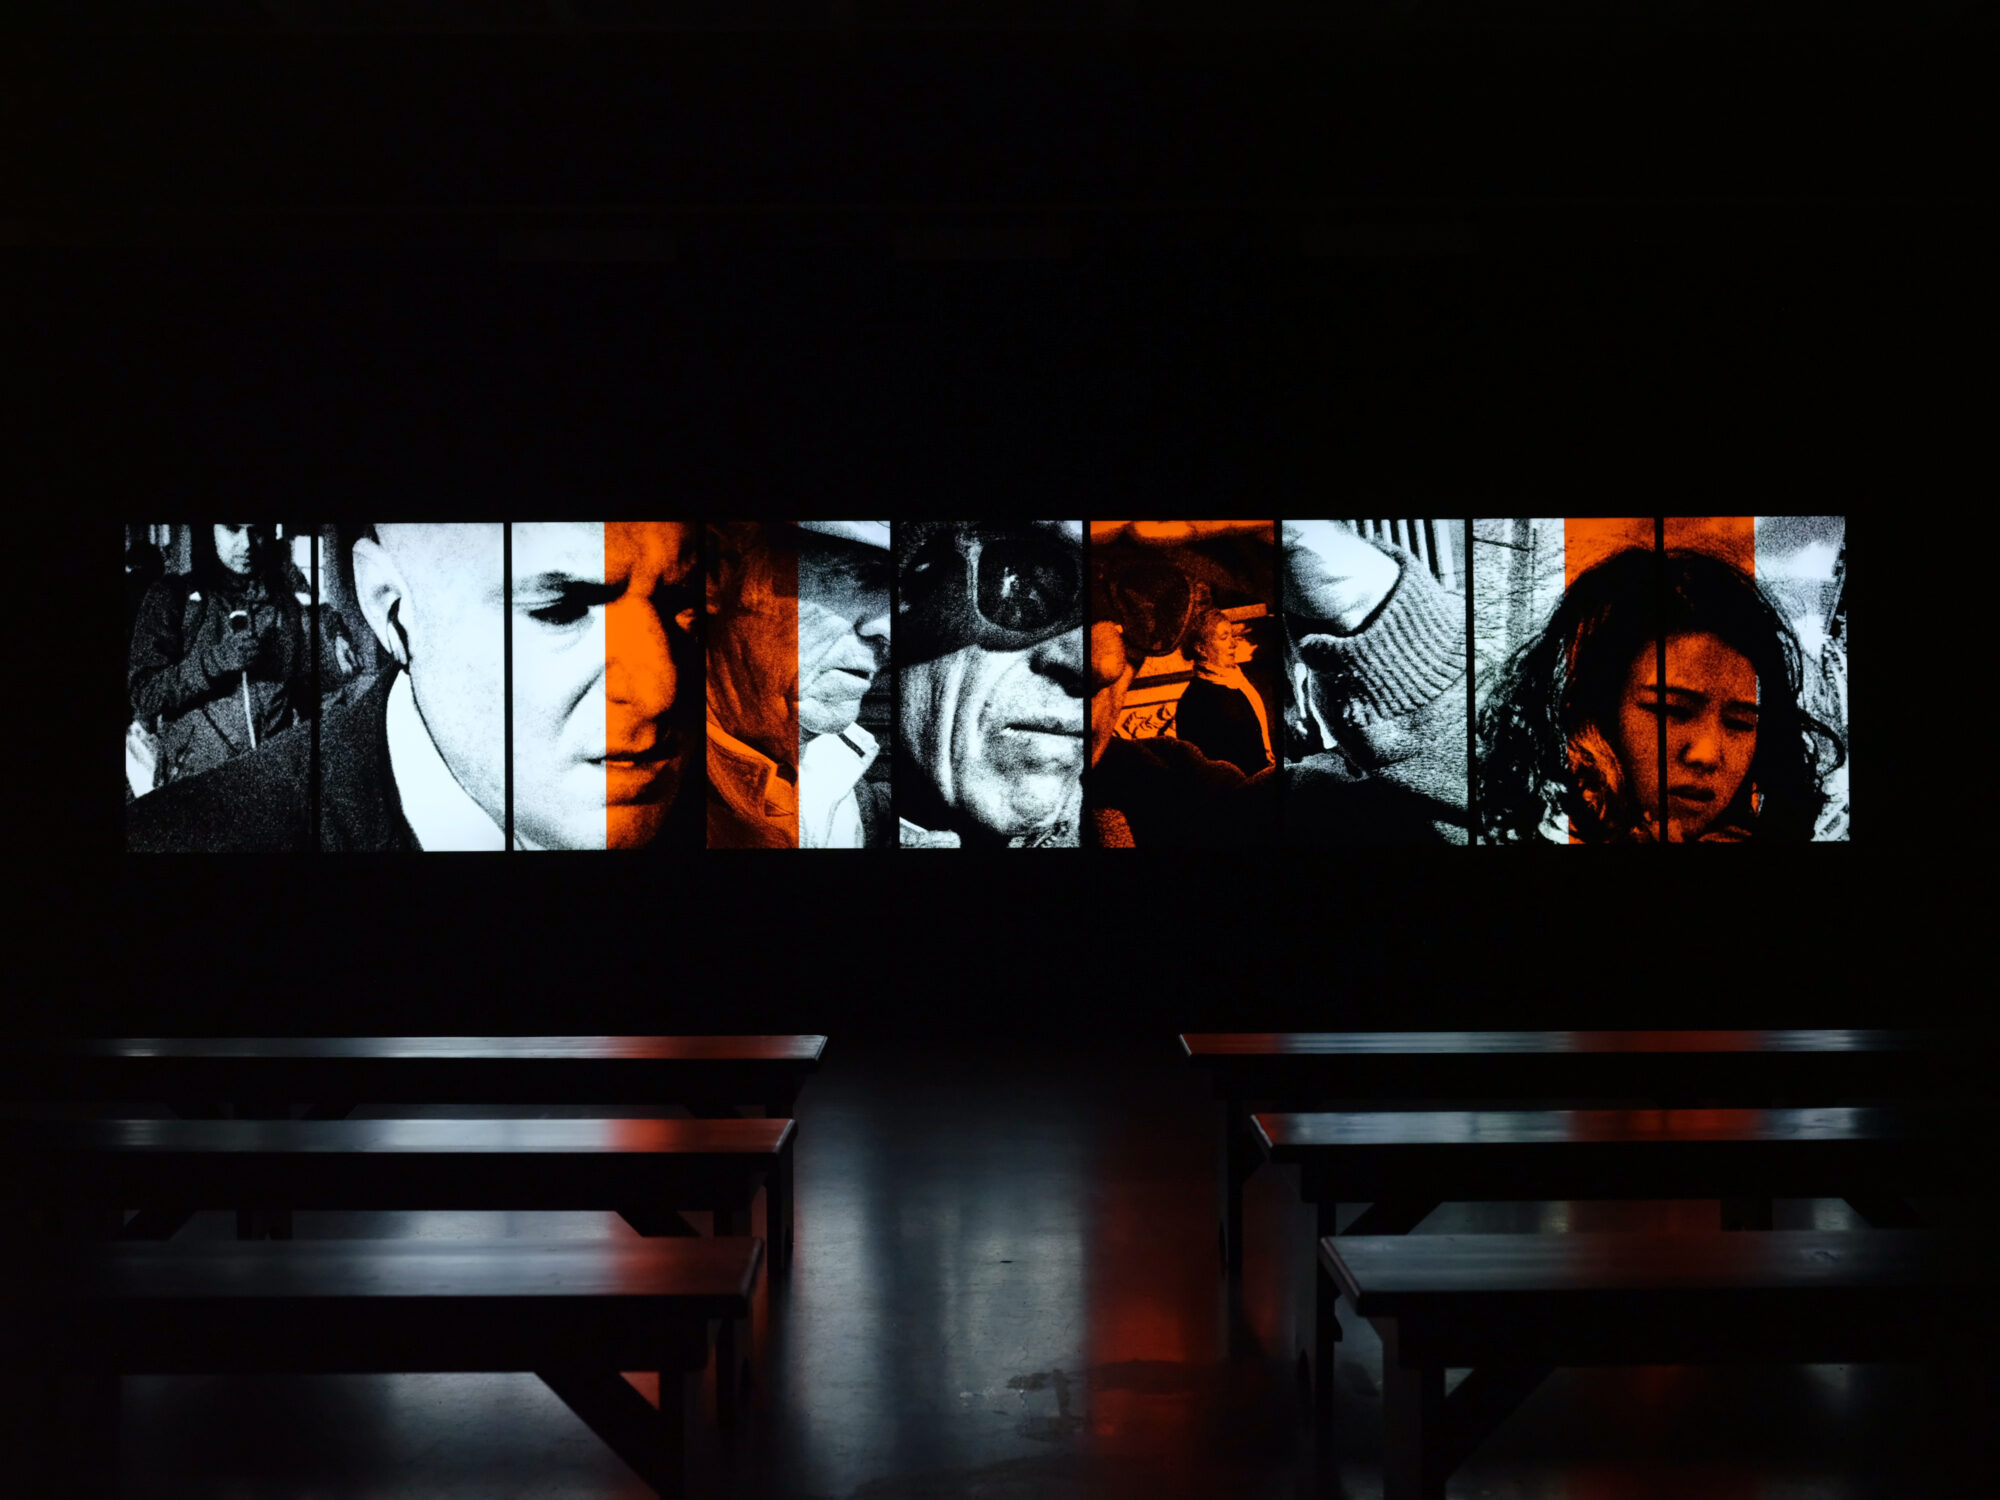 Image & Sound Installation: Made in Dublin